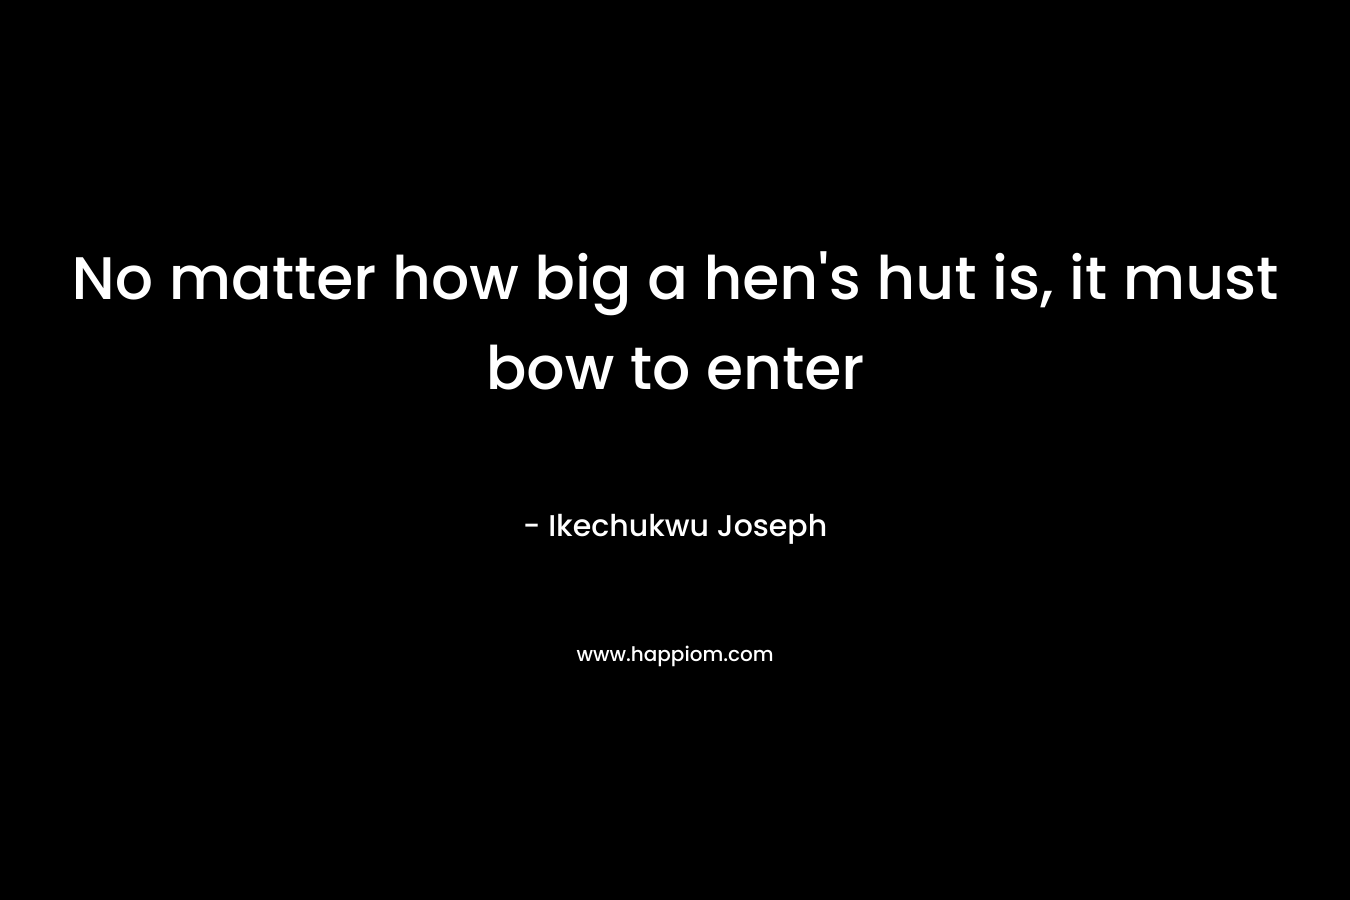 No matter how big a hen's hut is, it must bow to enter